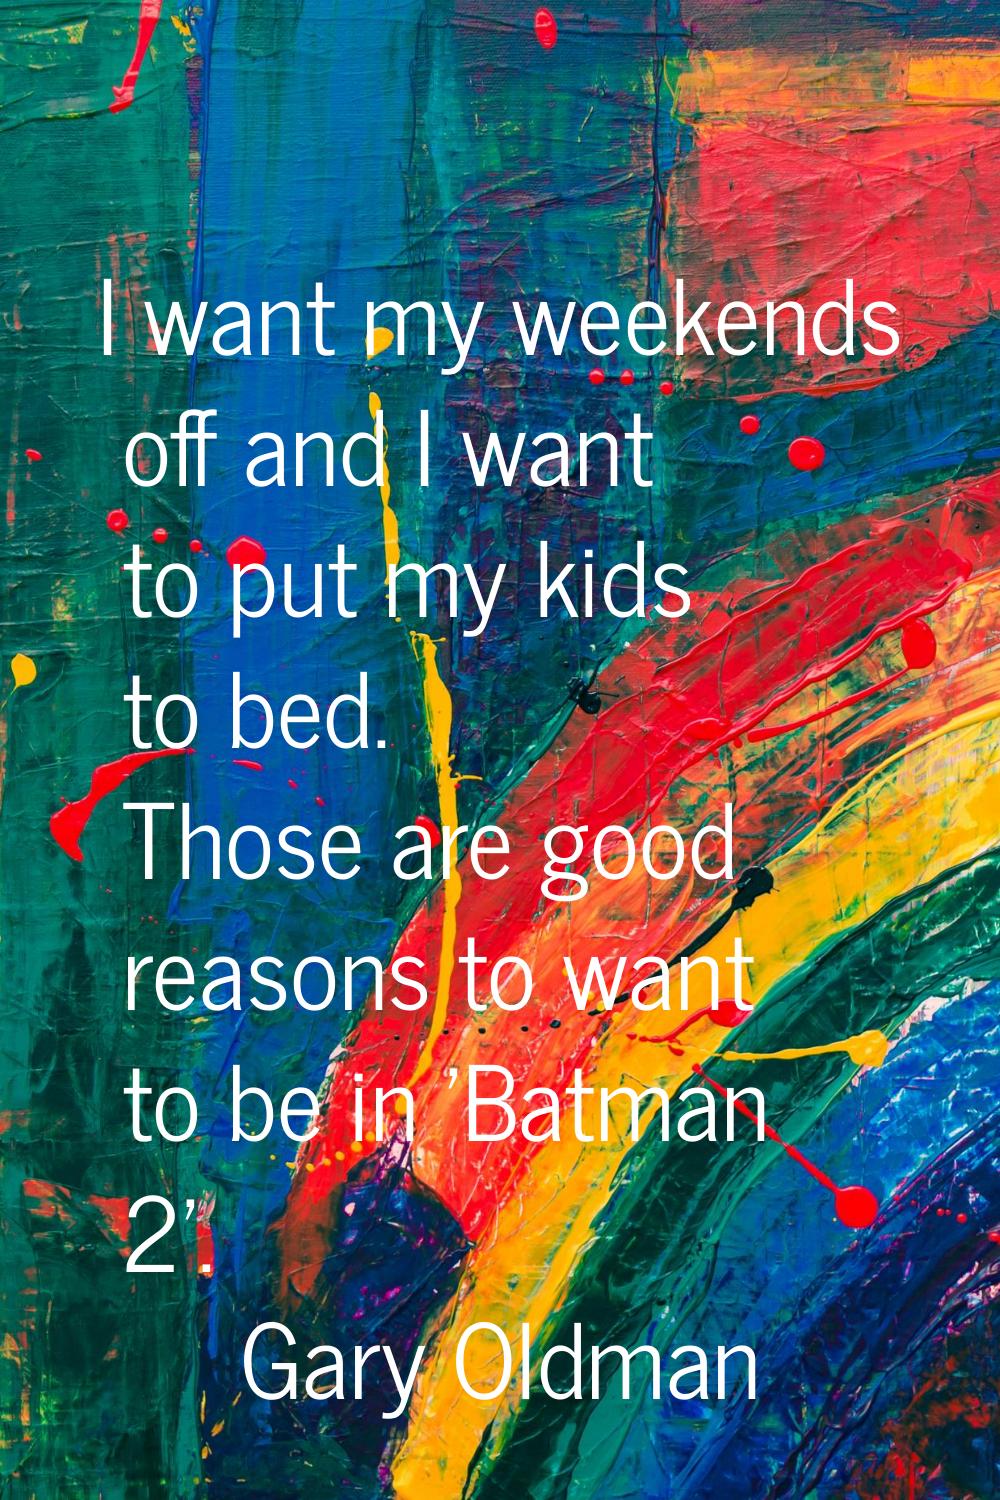 I want my weekends off and I want to put my kids to bed. Those are good reasons to want to be in 'B